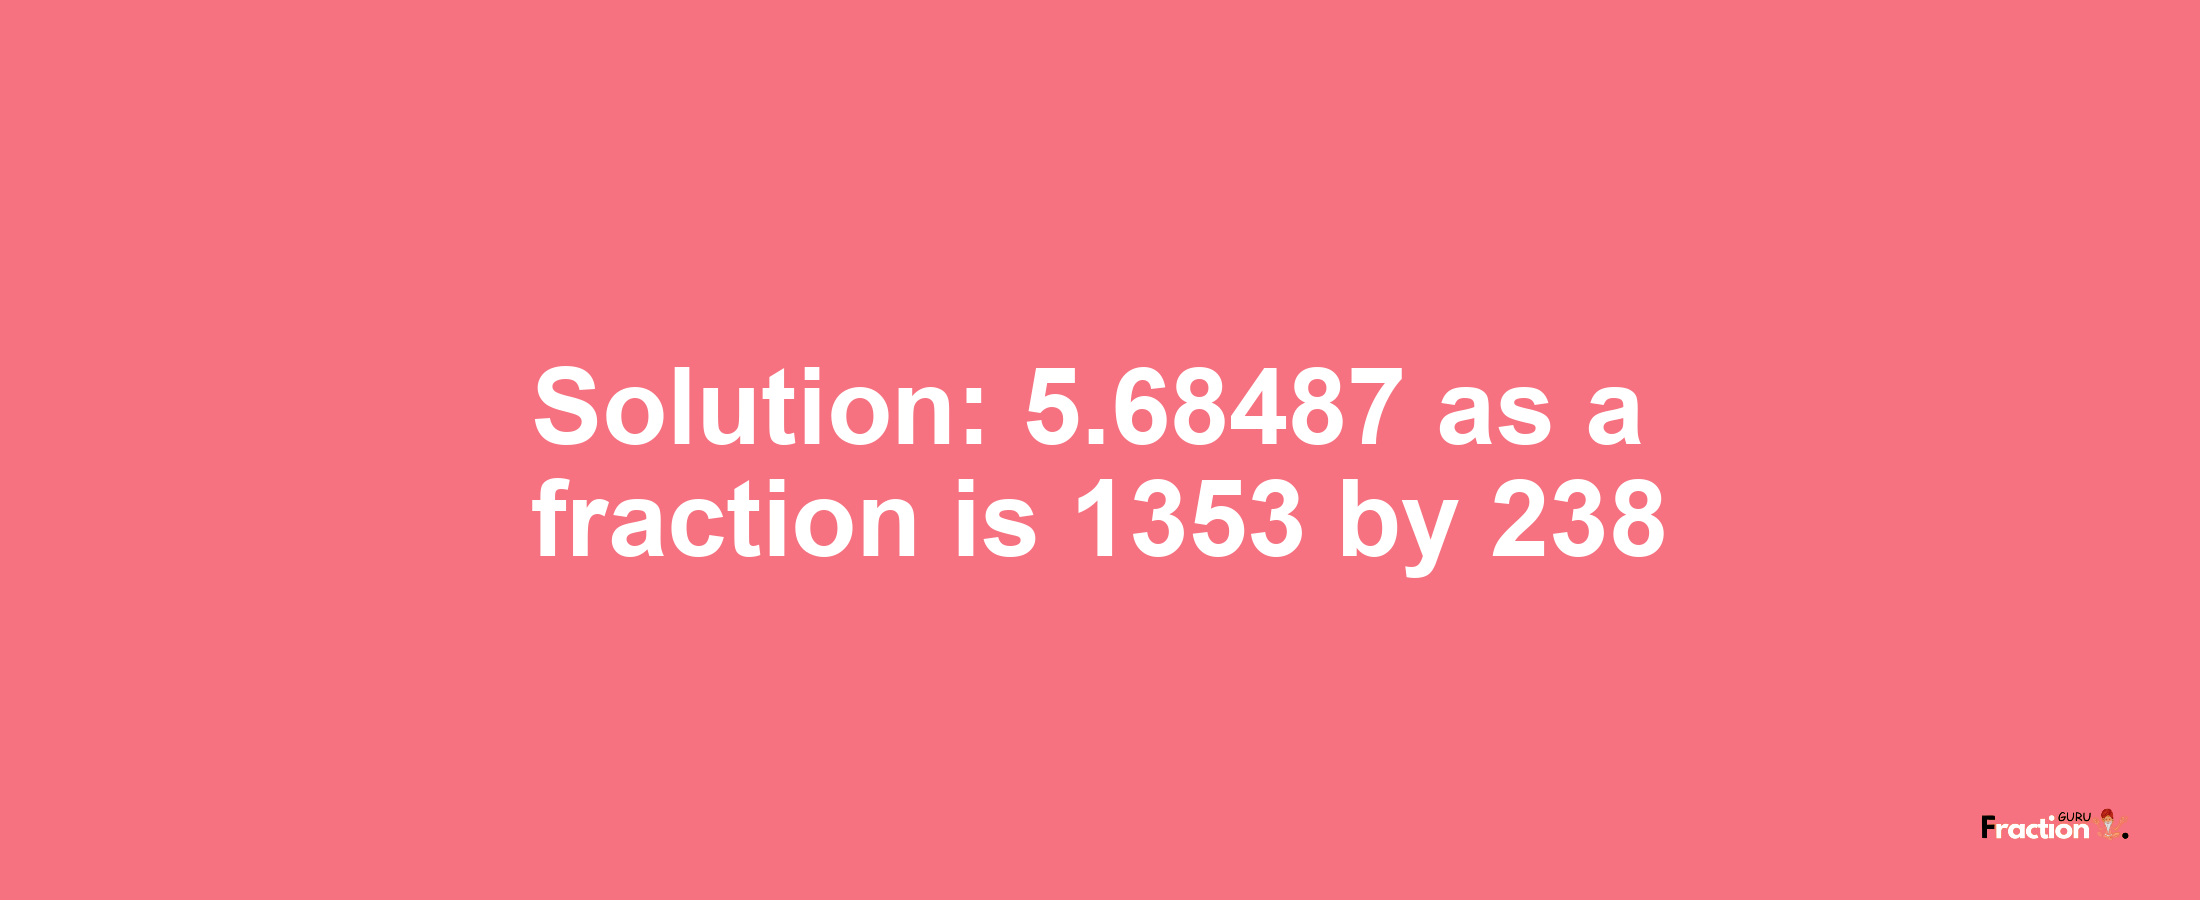 Solution:5.68487 as a fraction is 1353/238